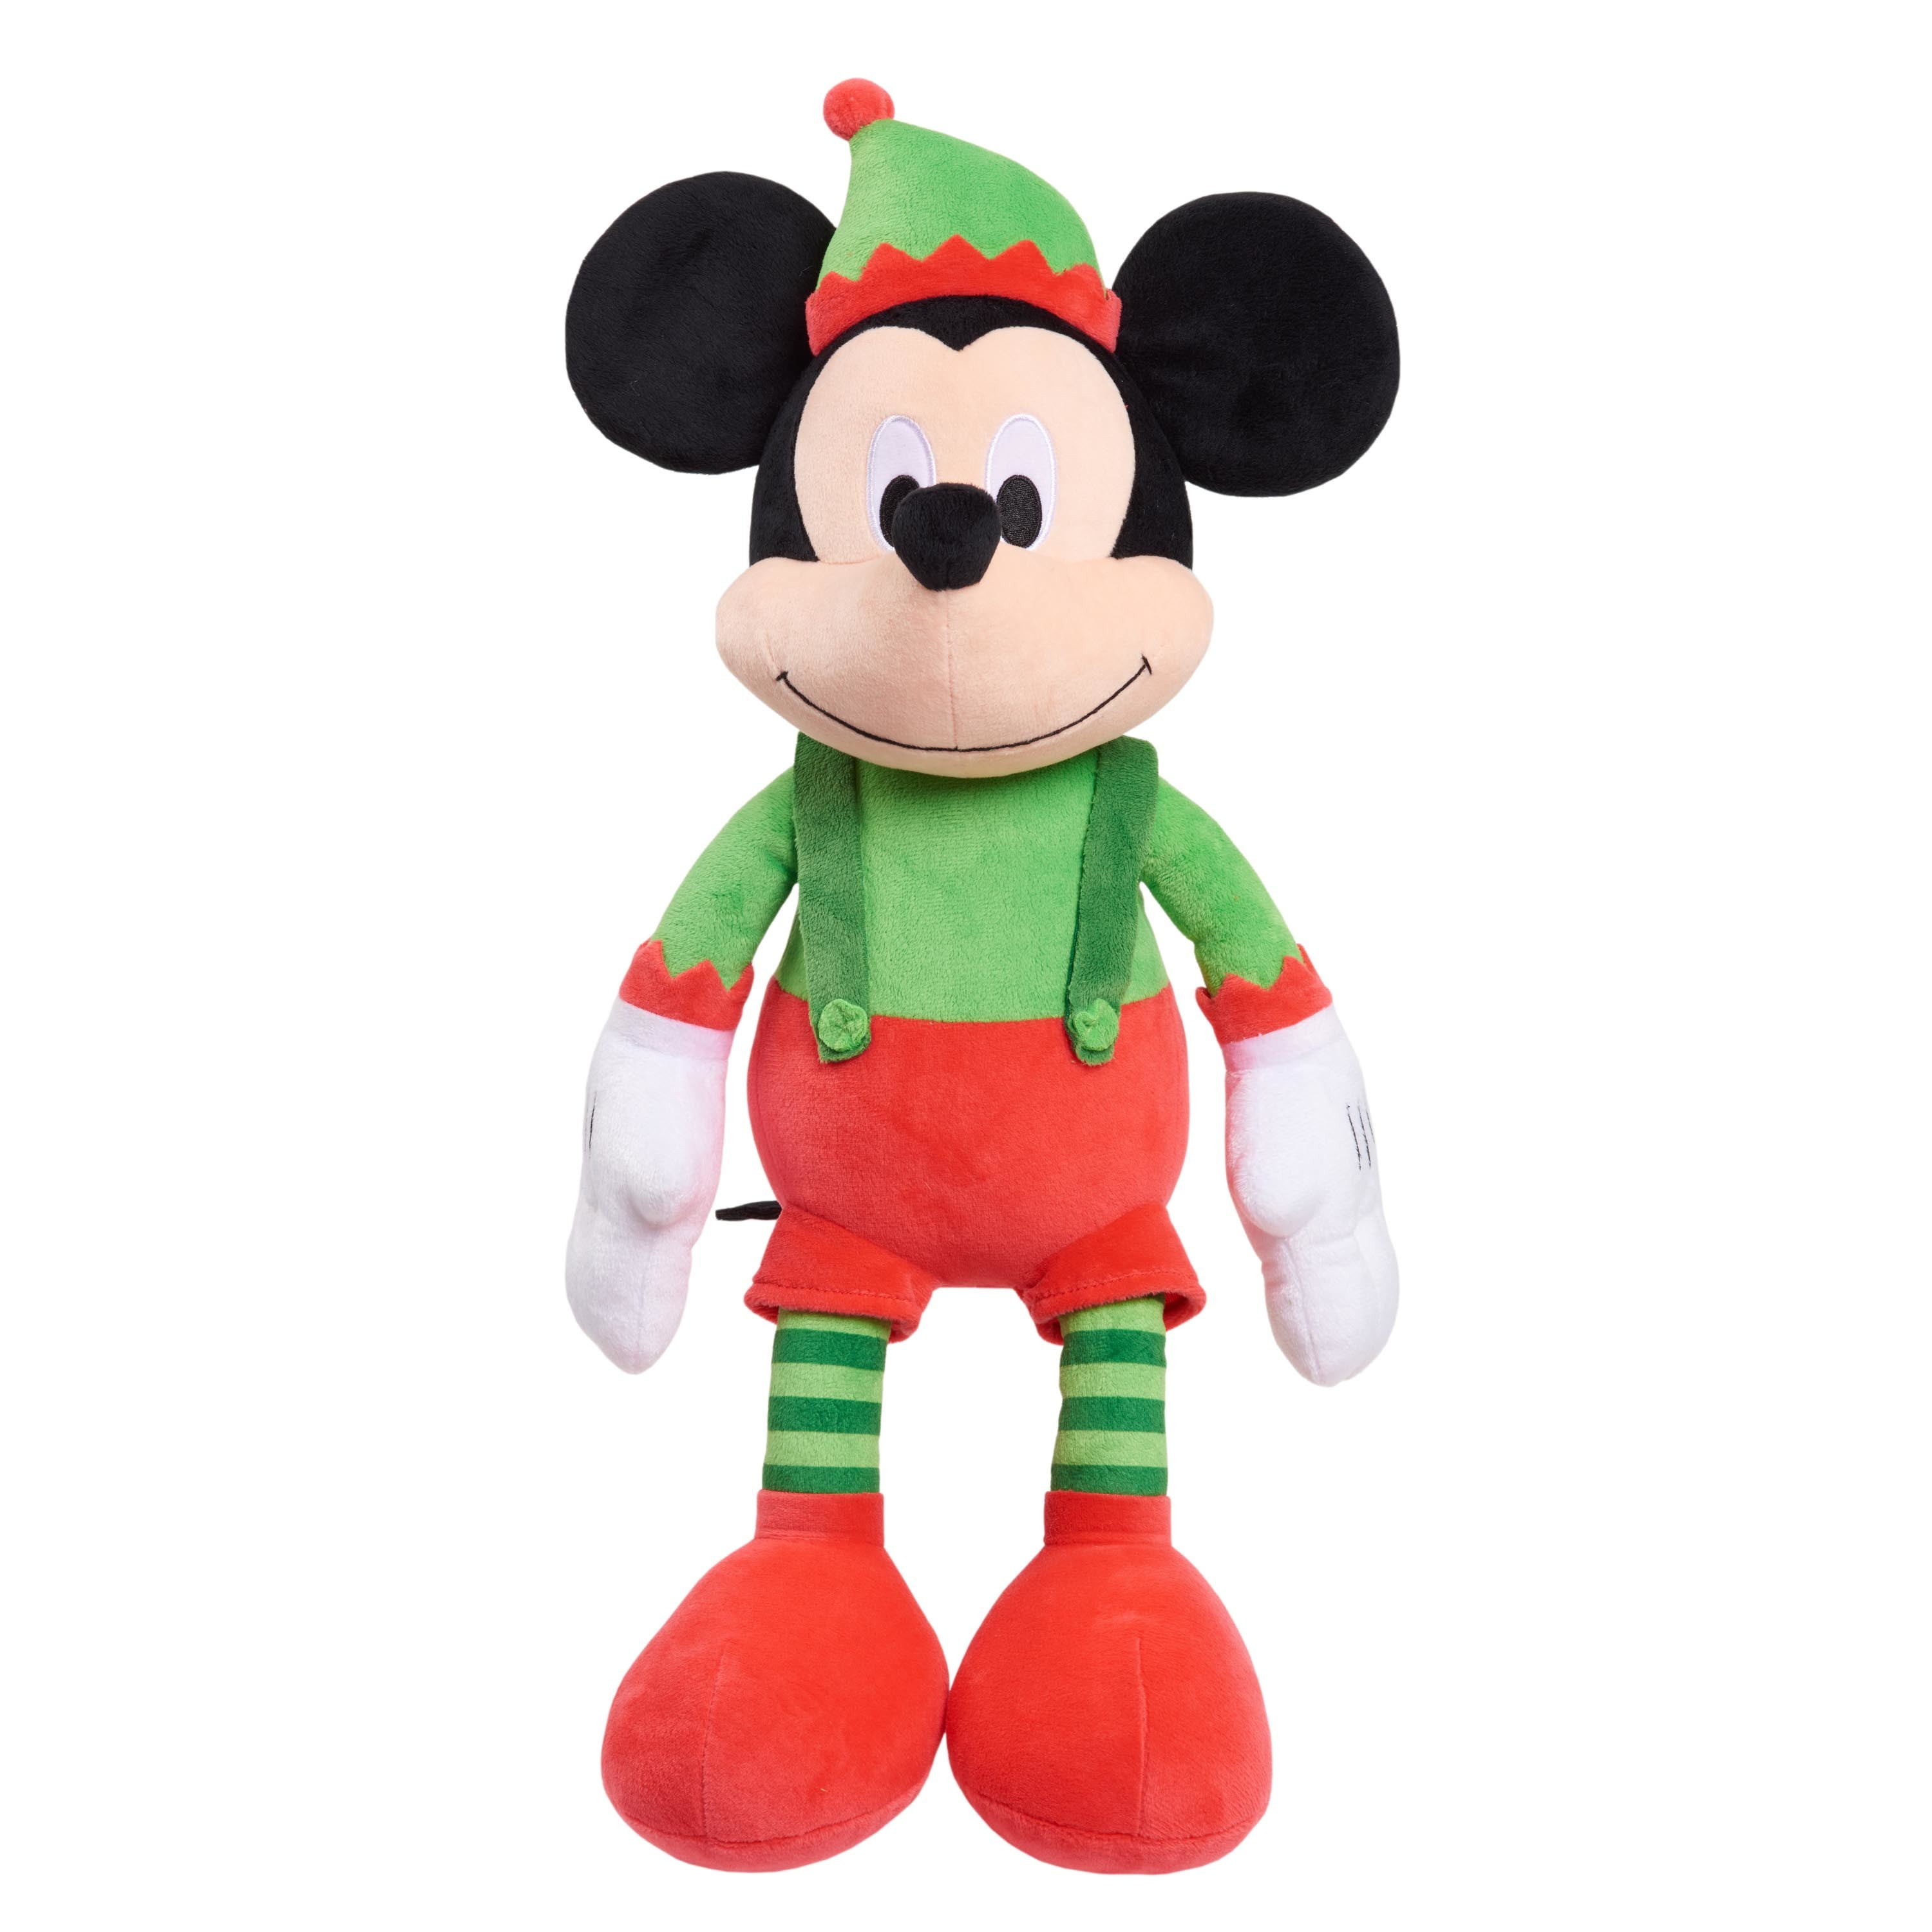 Red Disney Minnie Mouse Plush 18 Inches